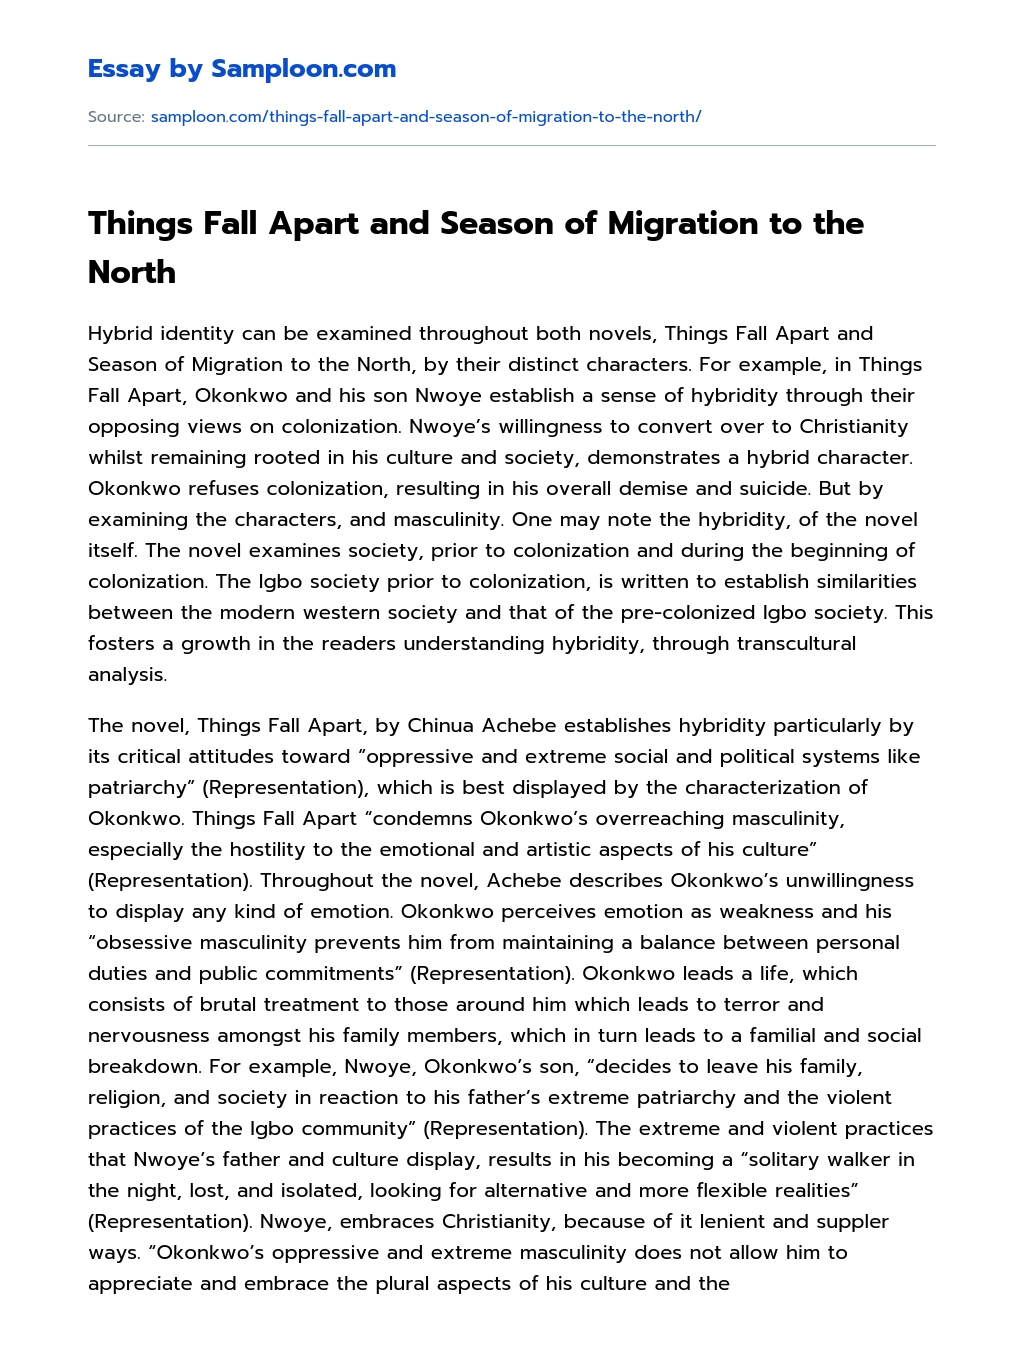 Things Fall Apart and Season of Migration to the North Book Review essay